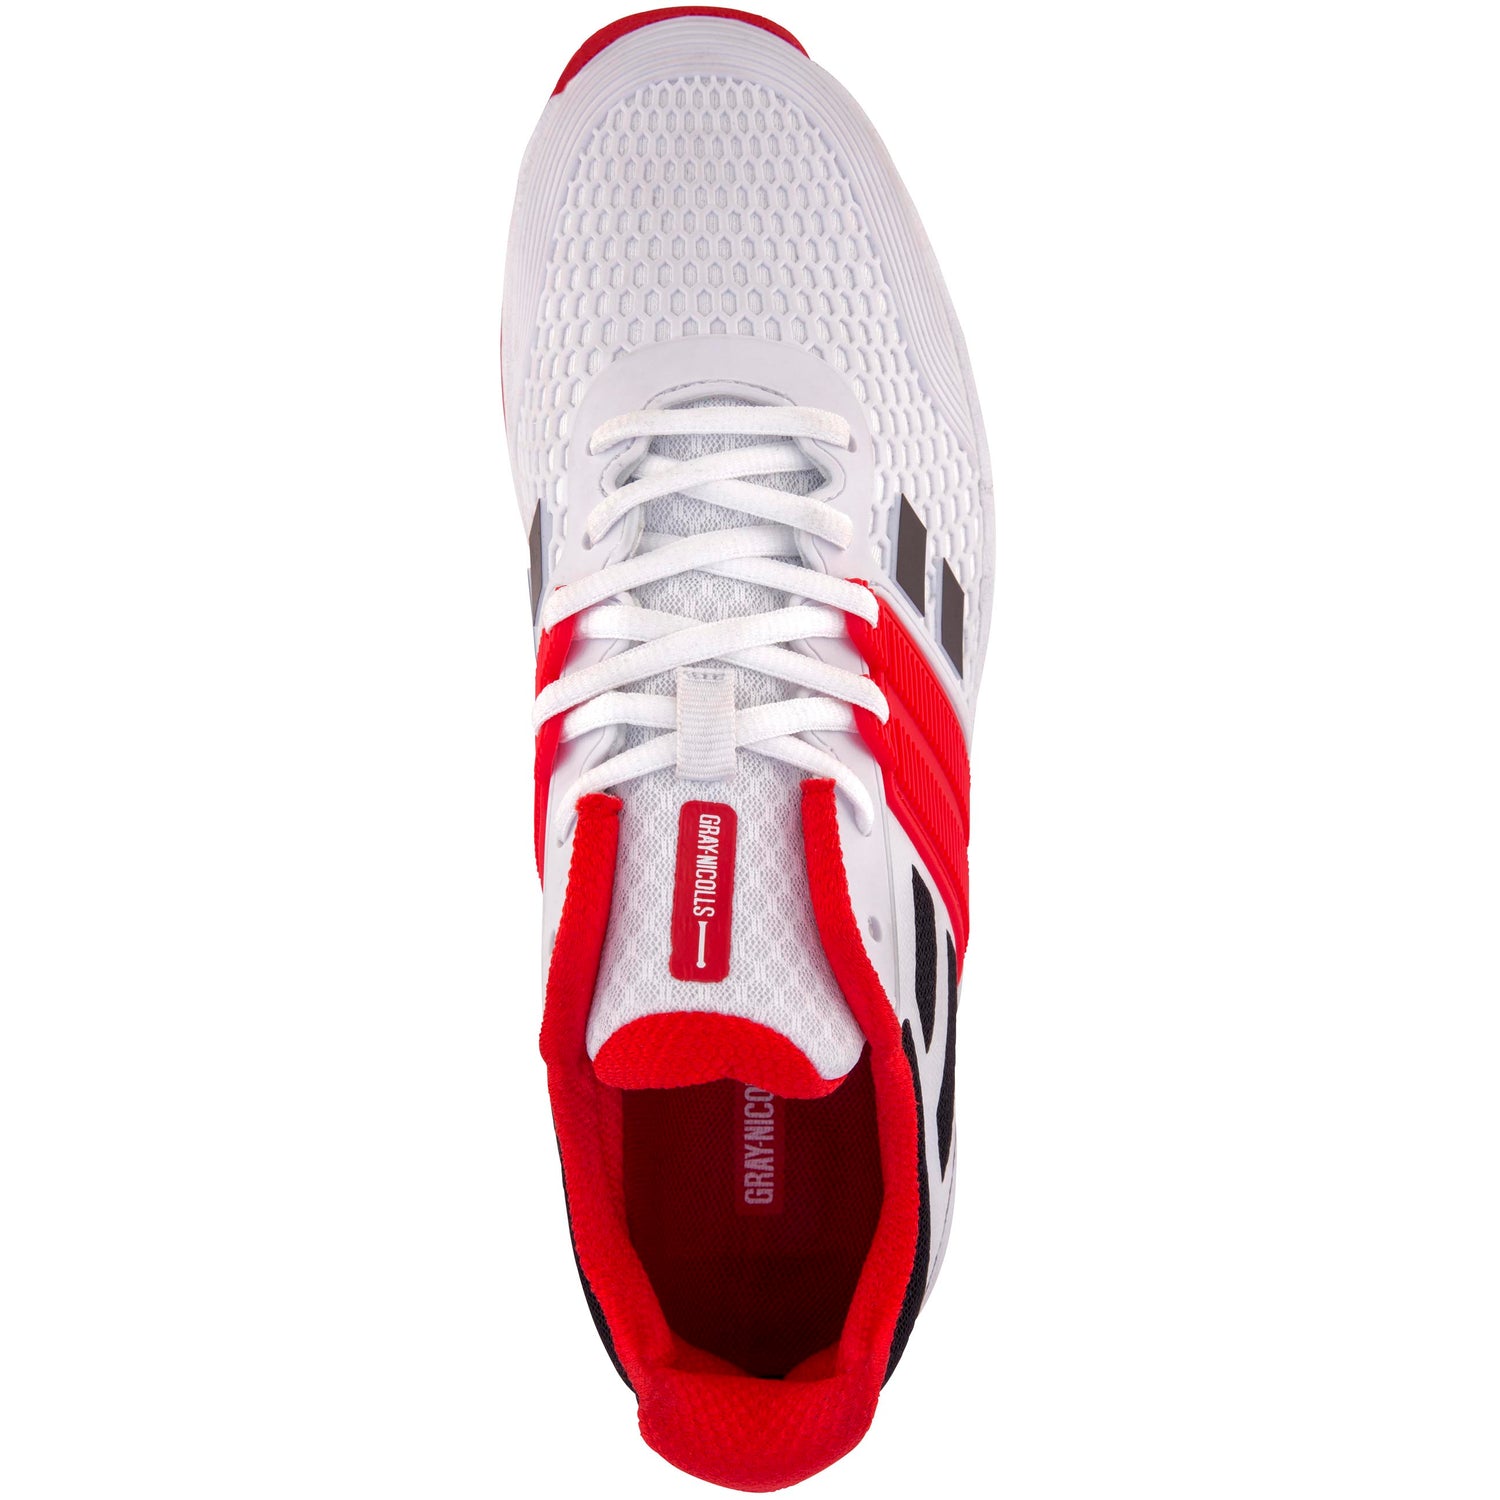 Cage 2.0 Spike Cricket Shoes | Gray 